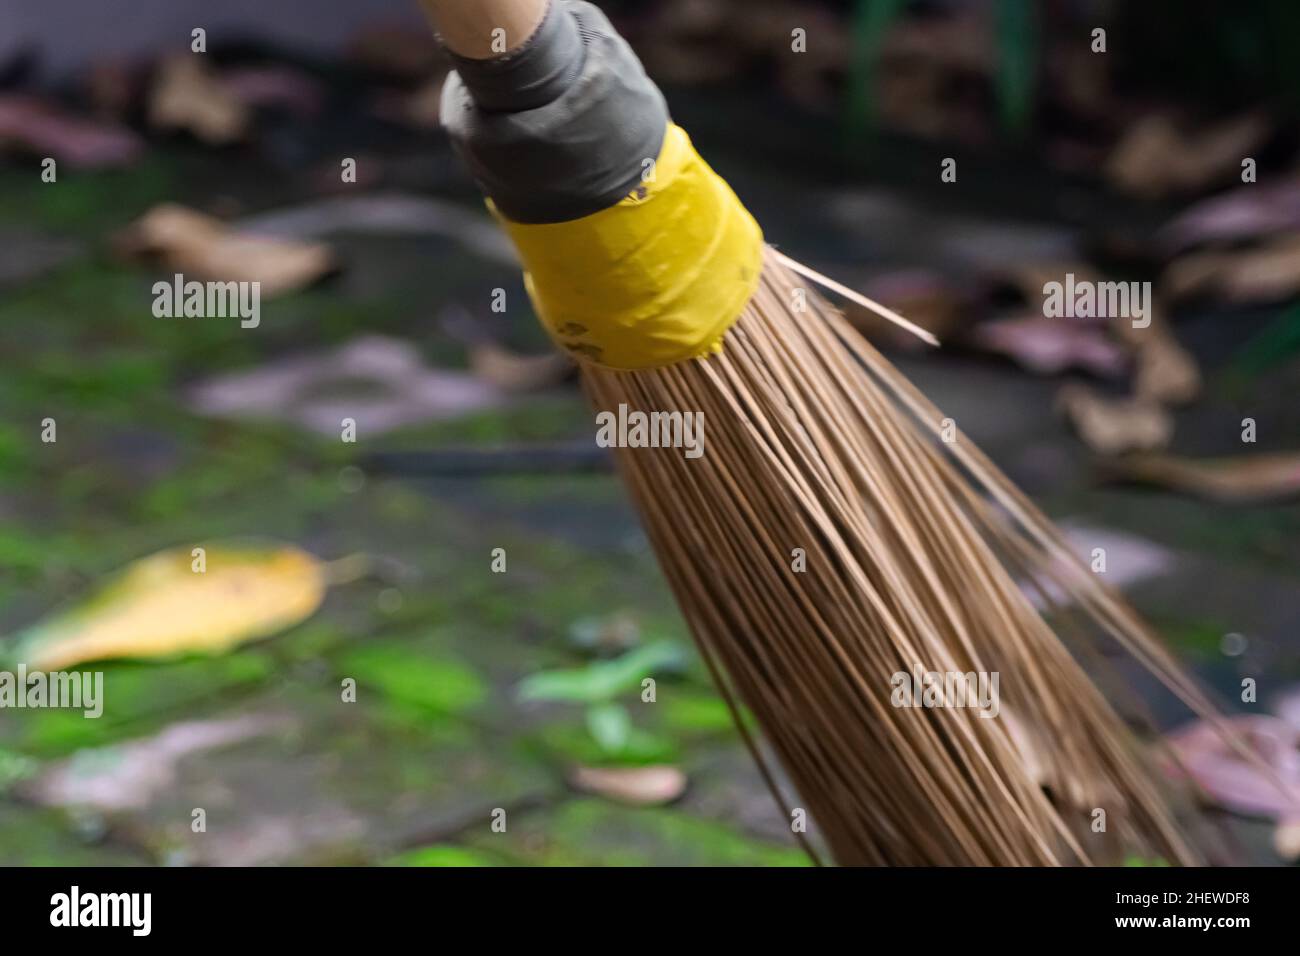 Home Front Broom High Resolution Stock Photography and Images - Alamy